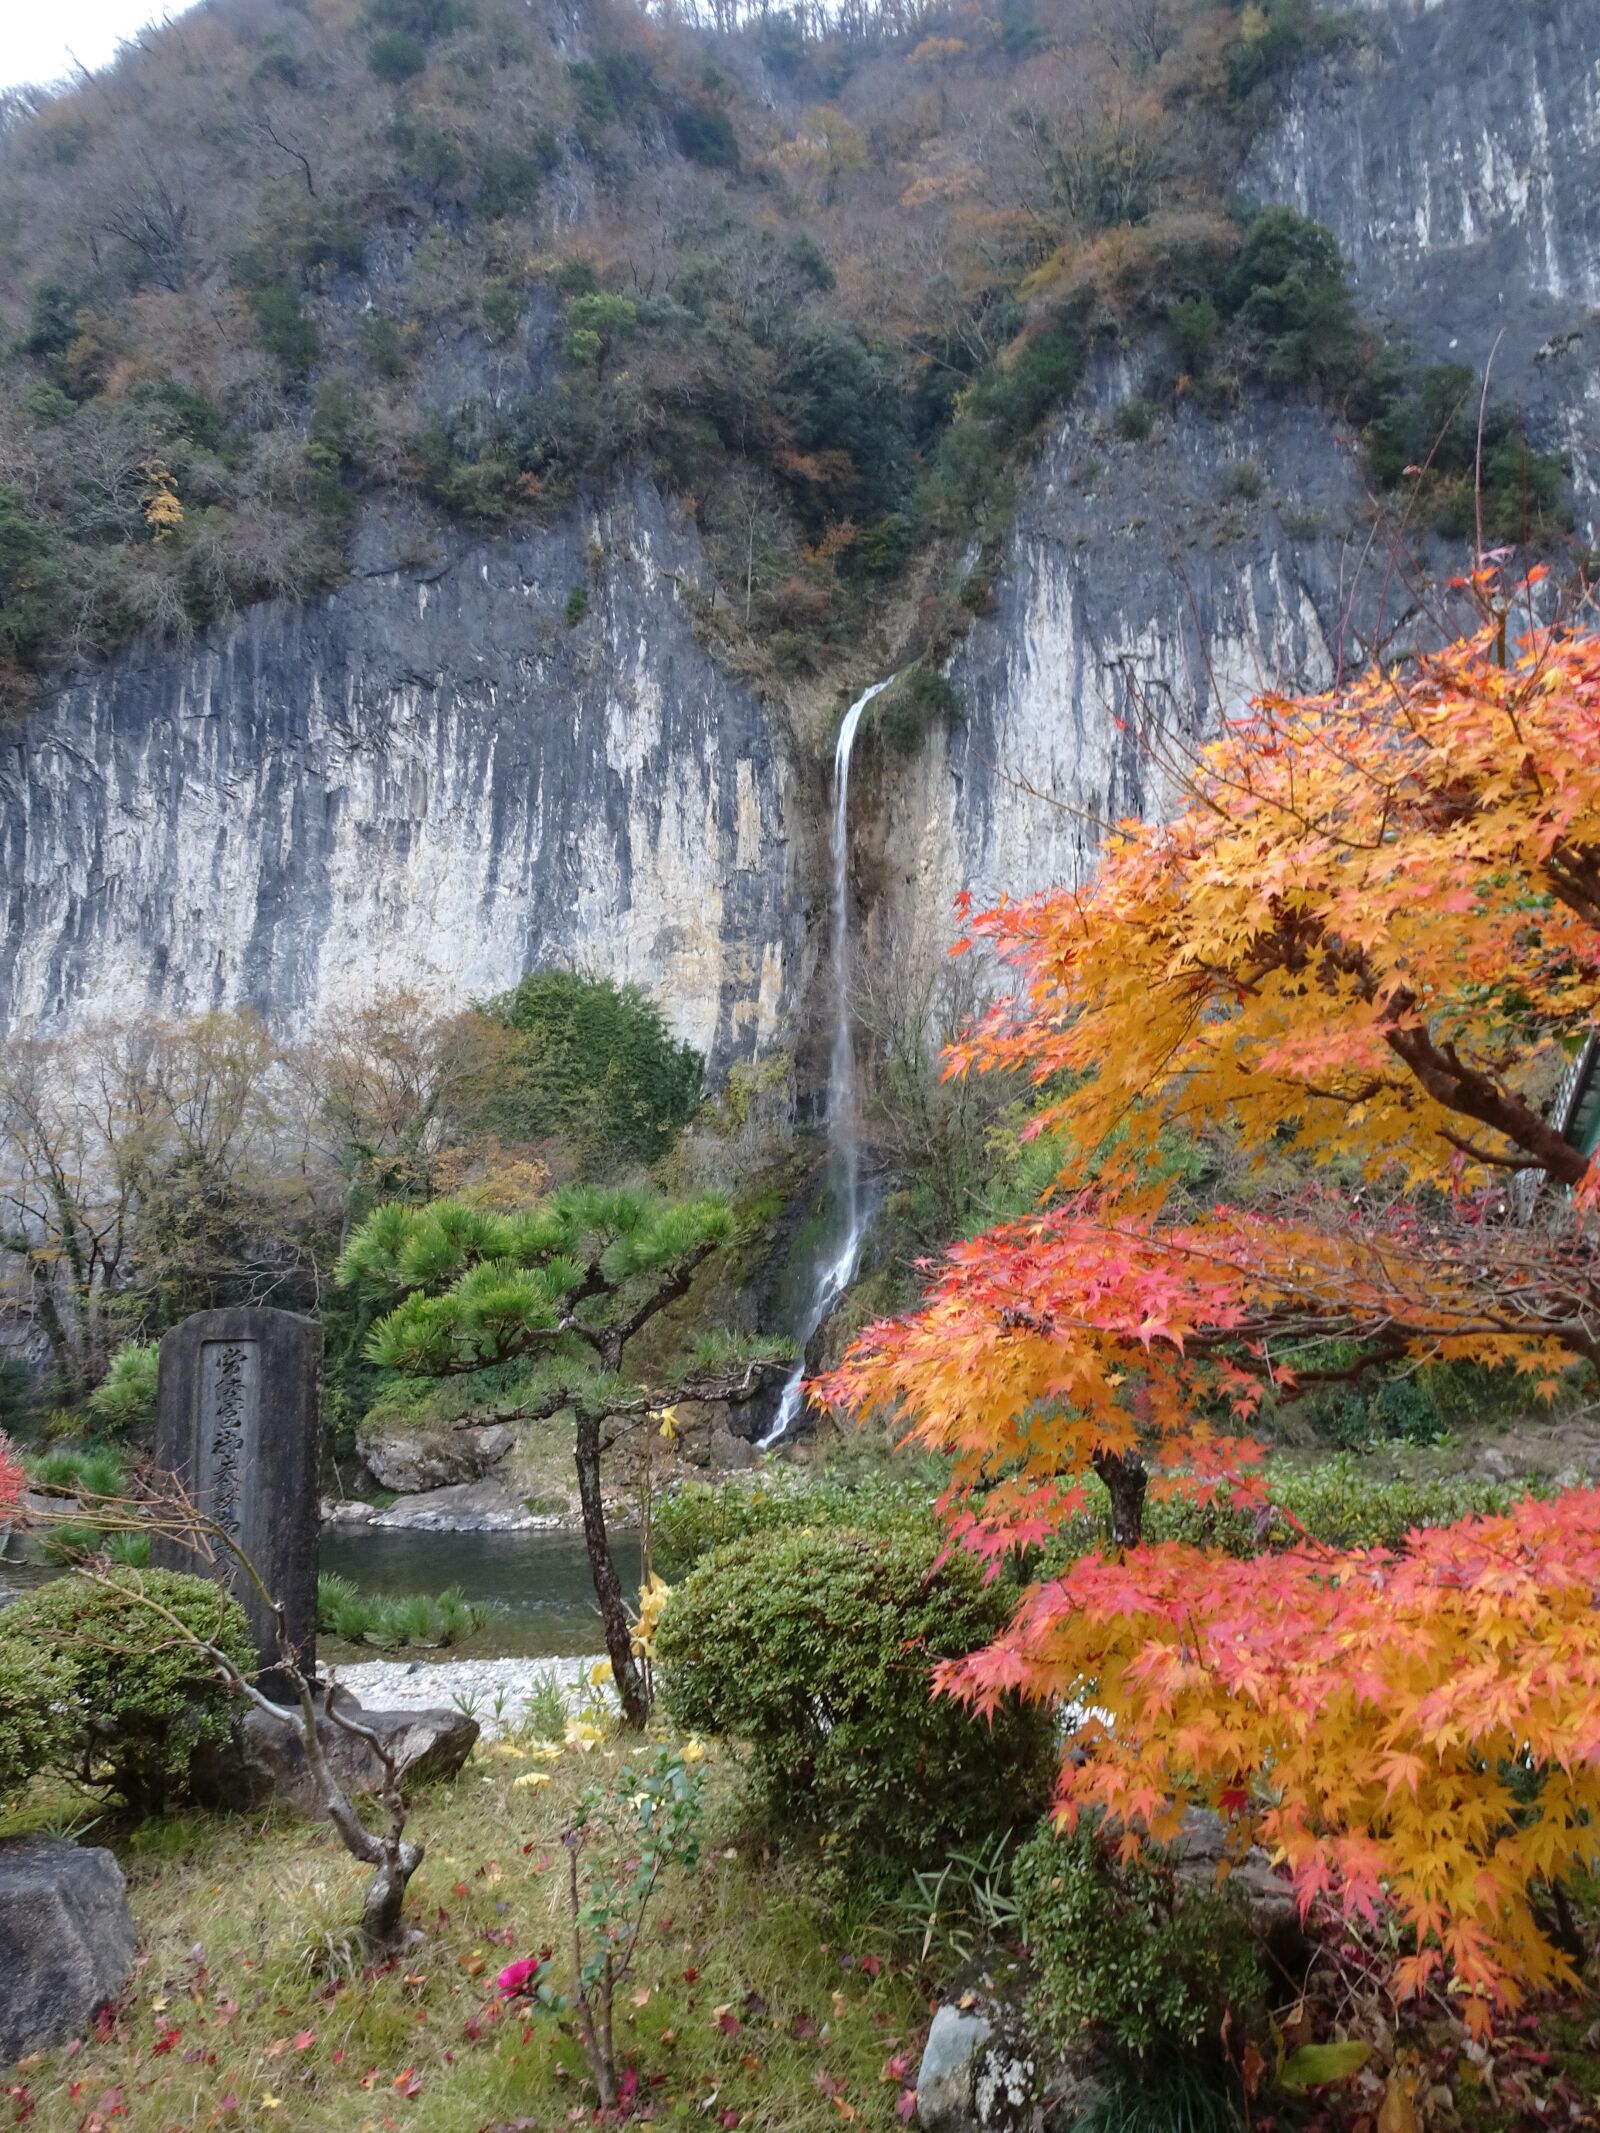 Sony Cyber-shot DSC-WX500 sample photo. Ikura cave, autumnal leaves photography